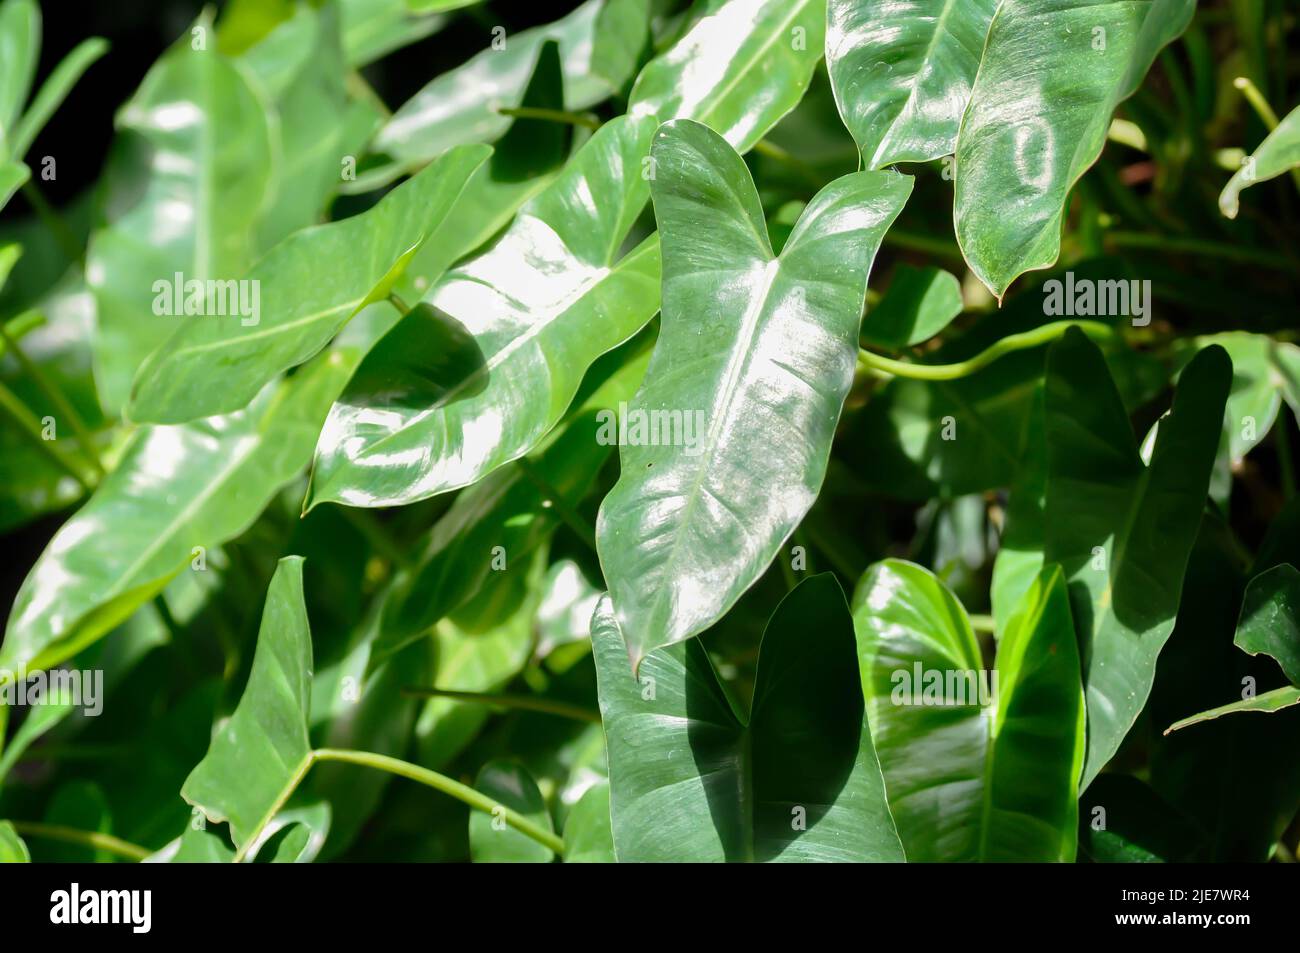 Philodendron burle marxii, Philodendron plant or green leaf background Stock Photo